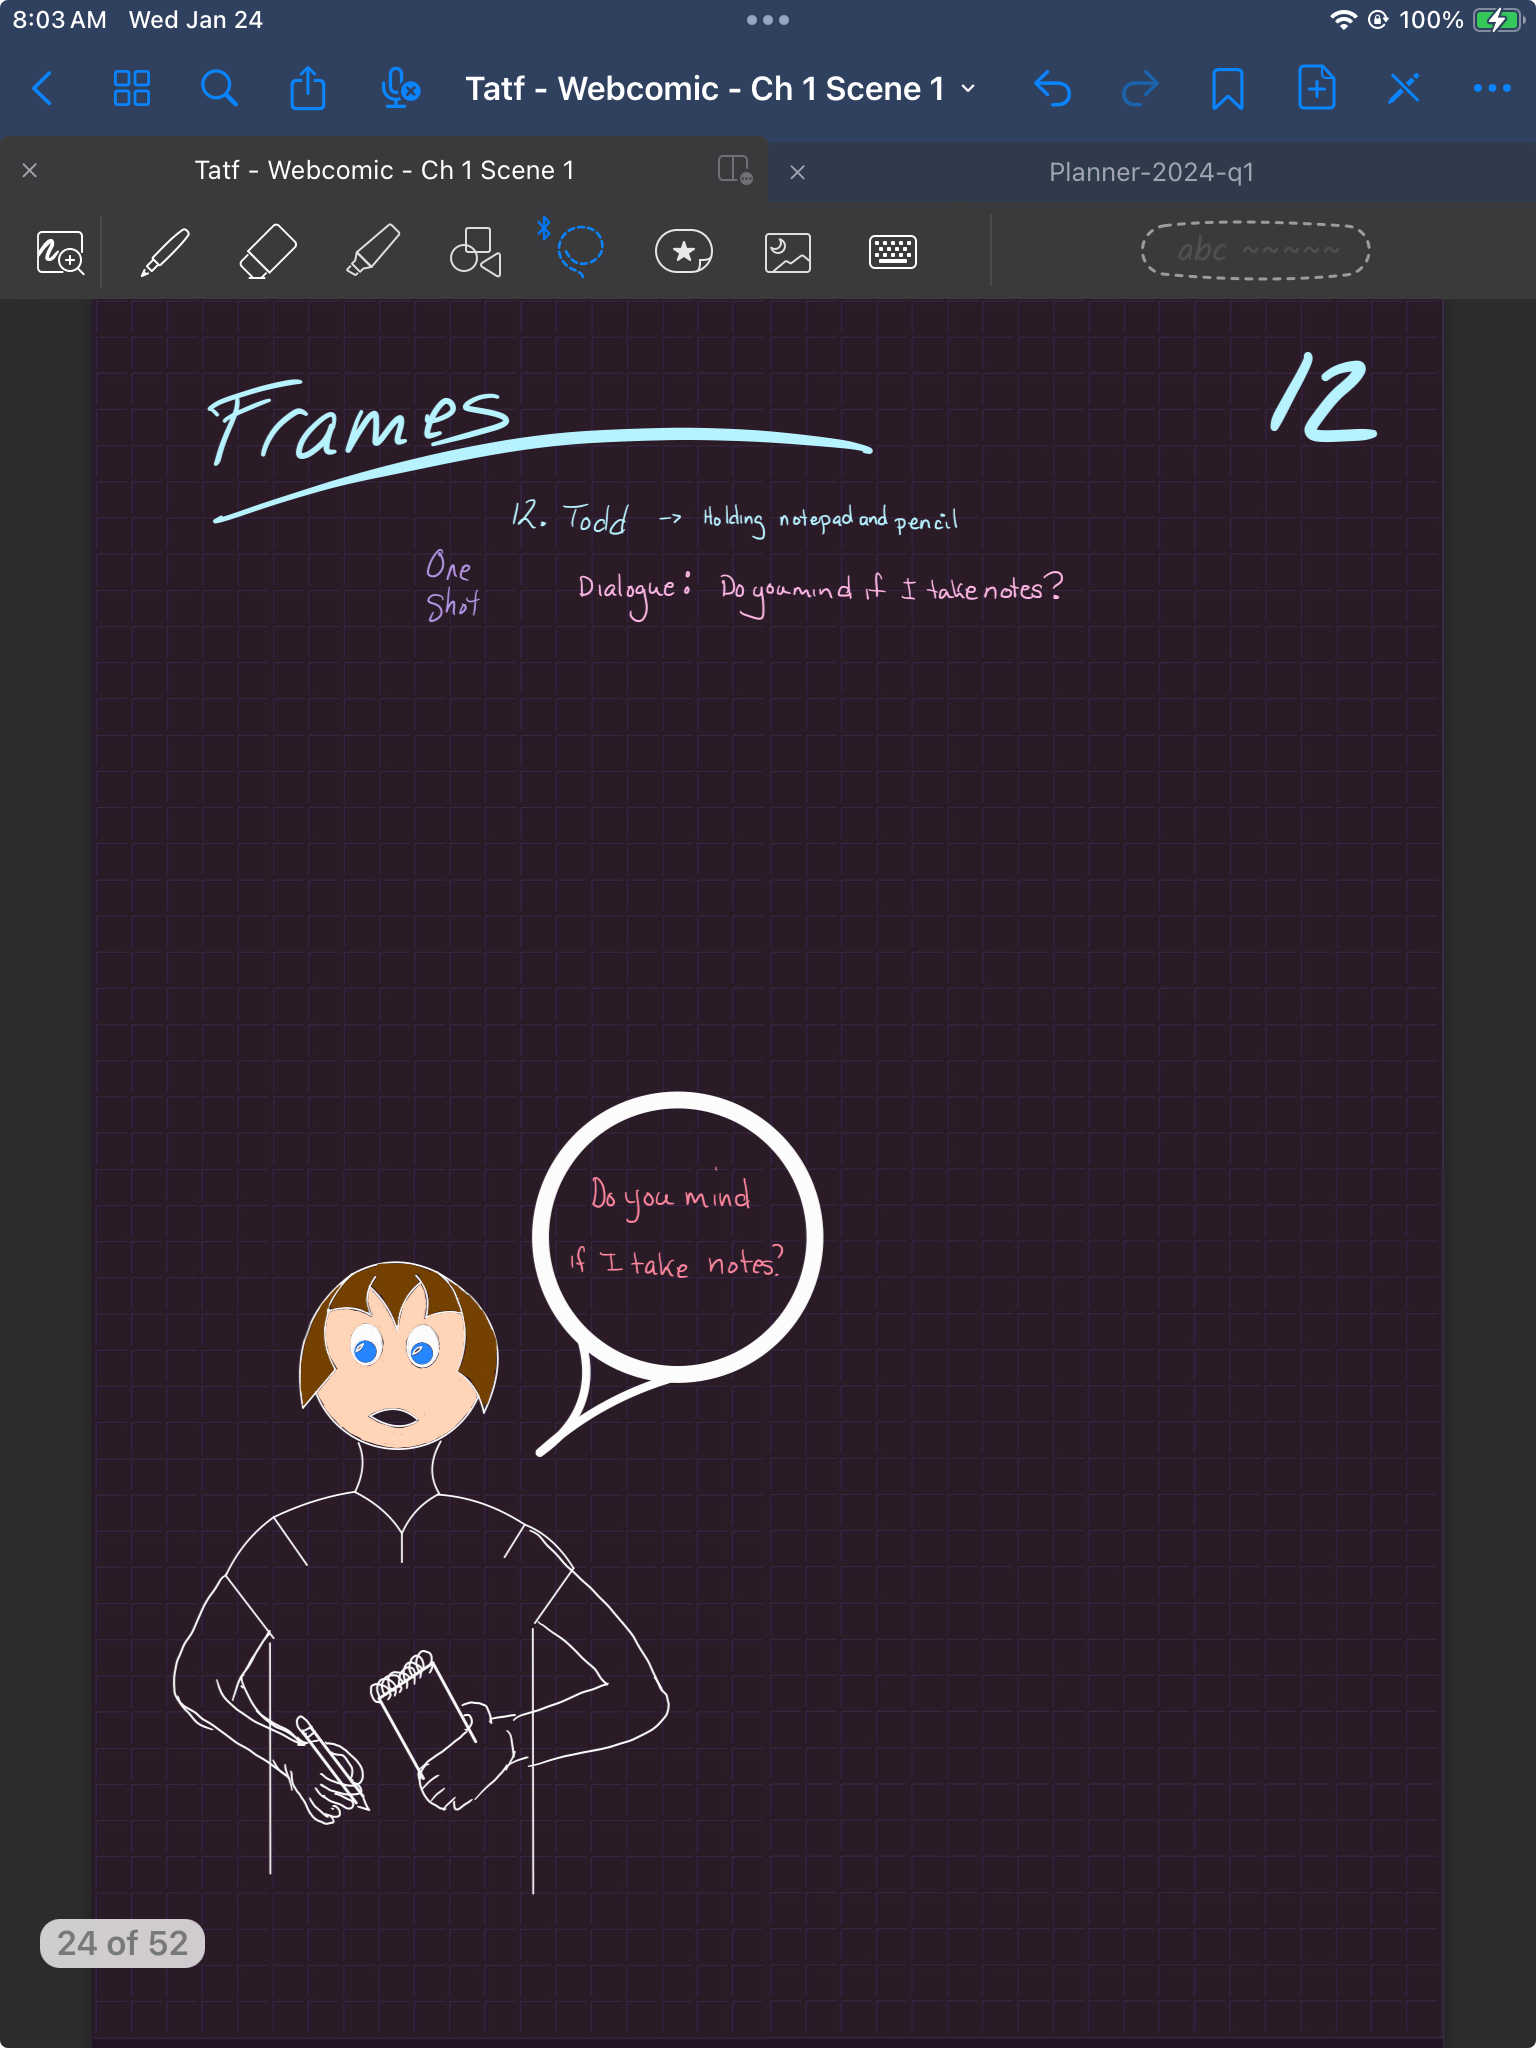 Project: Todd and the Fae WebComic : Frame 12